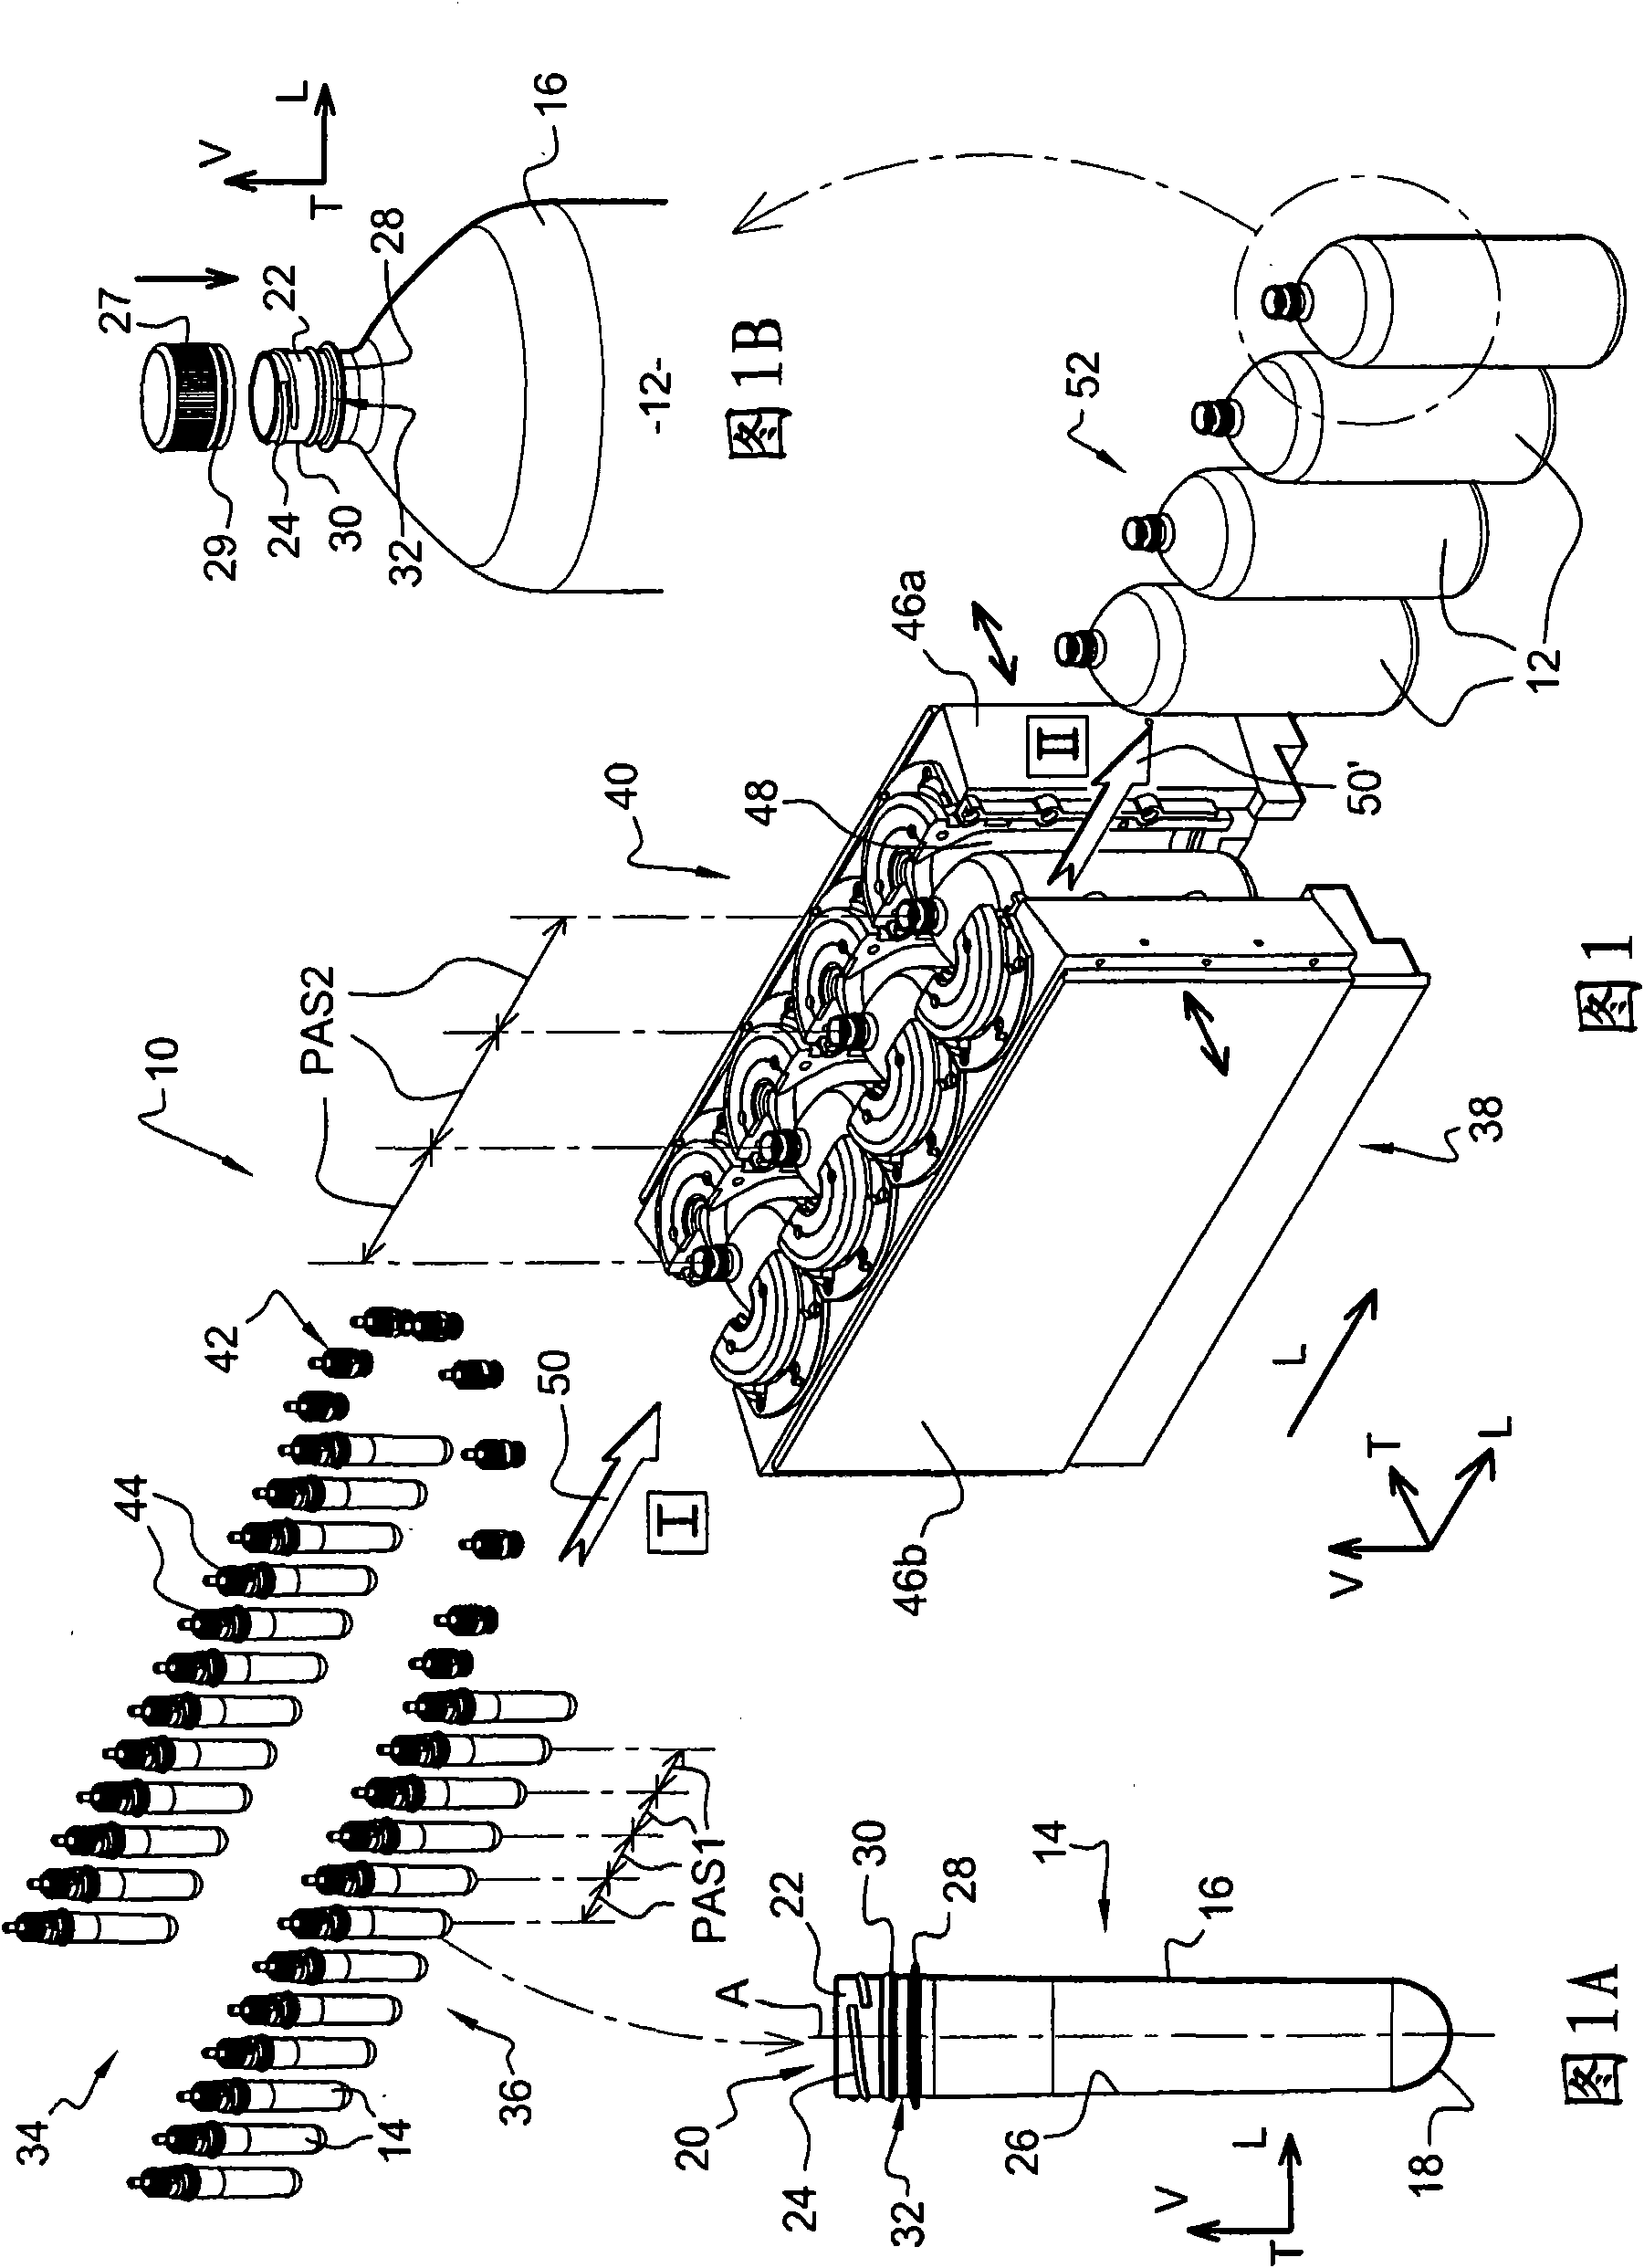 Transfer device and linear-type apparatus for the manufacture of containers